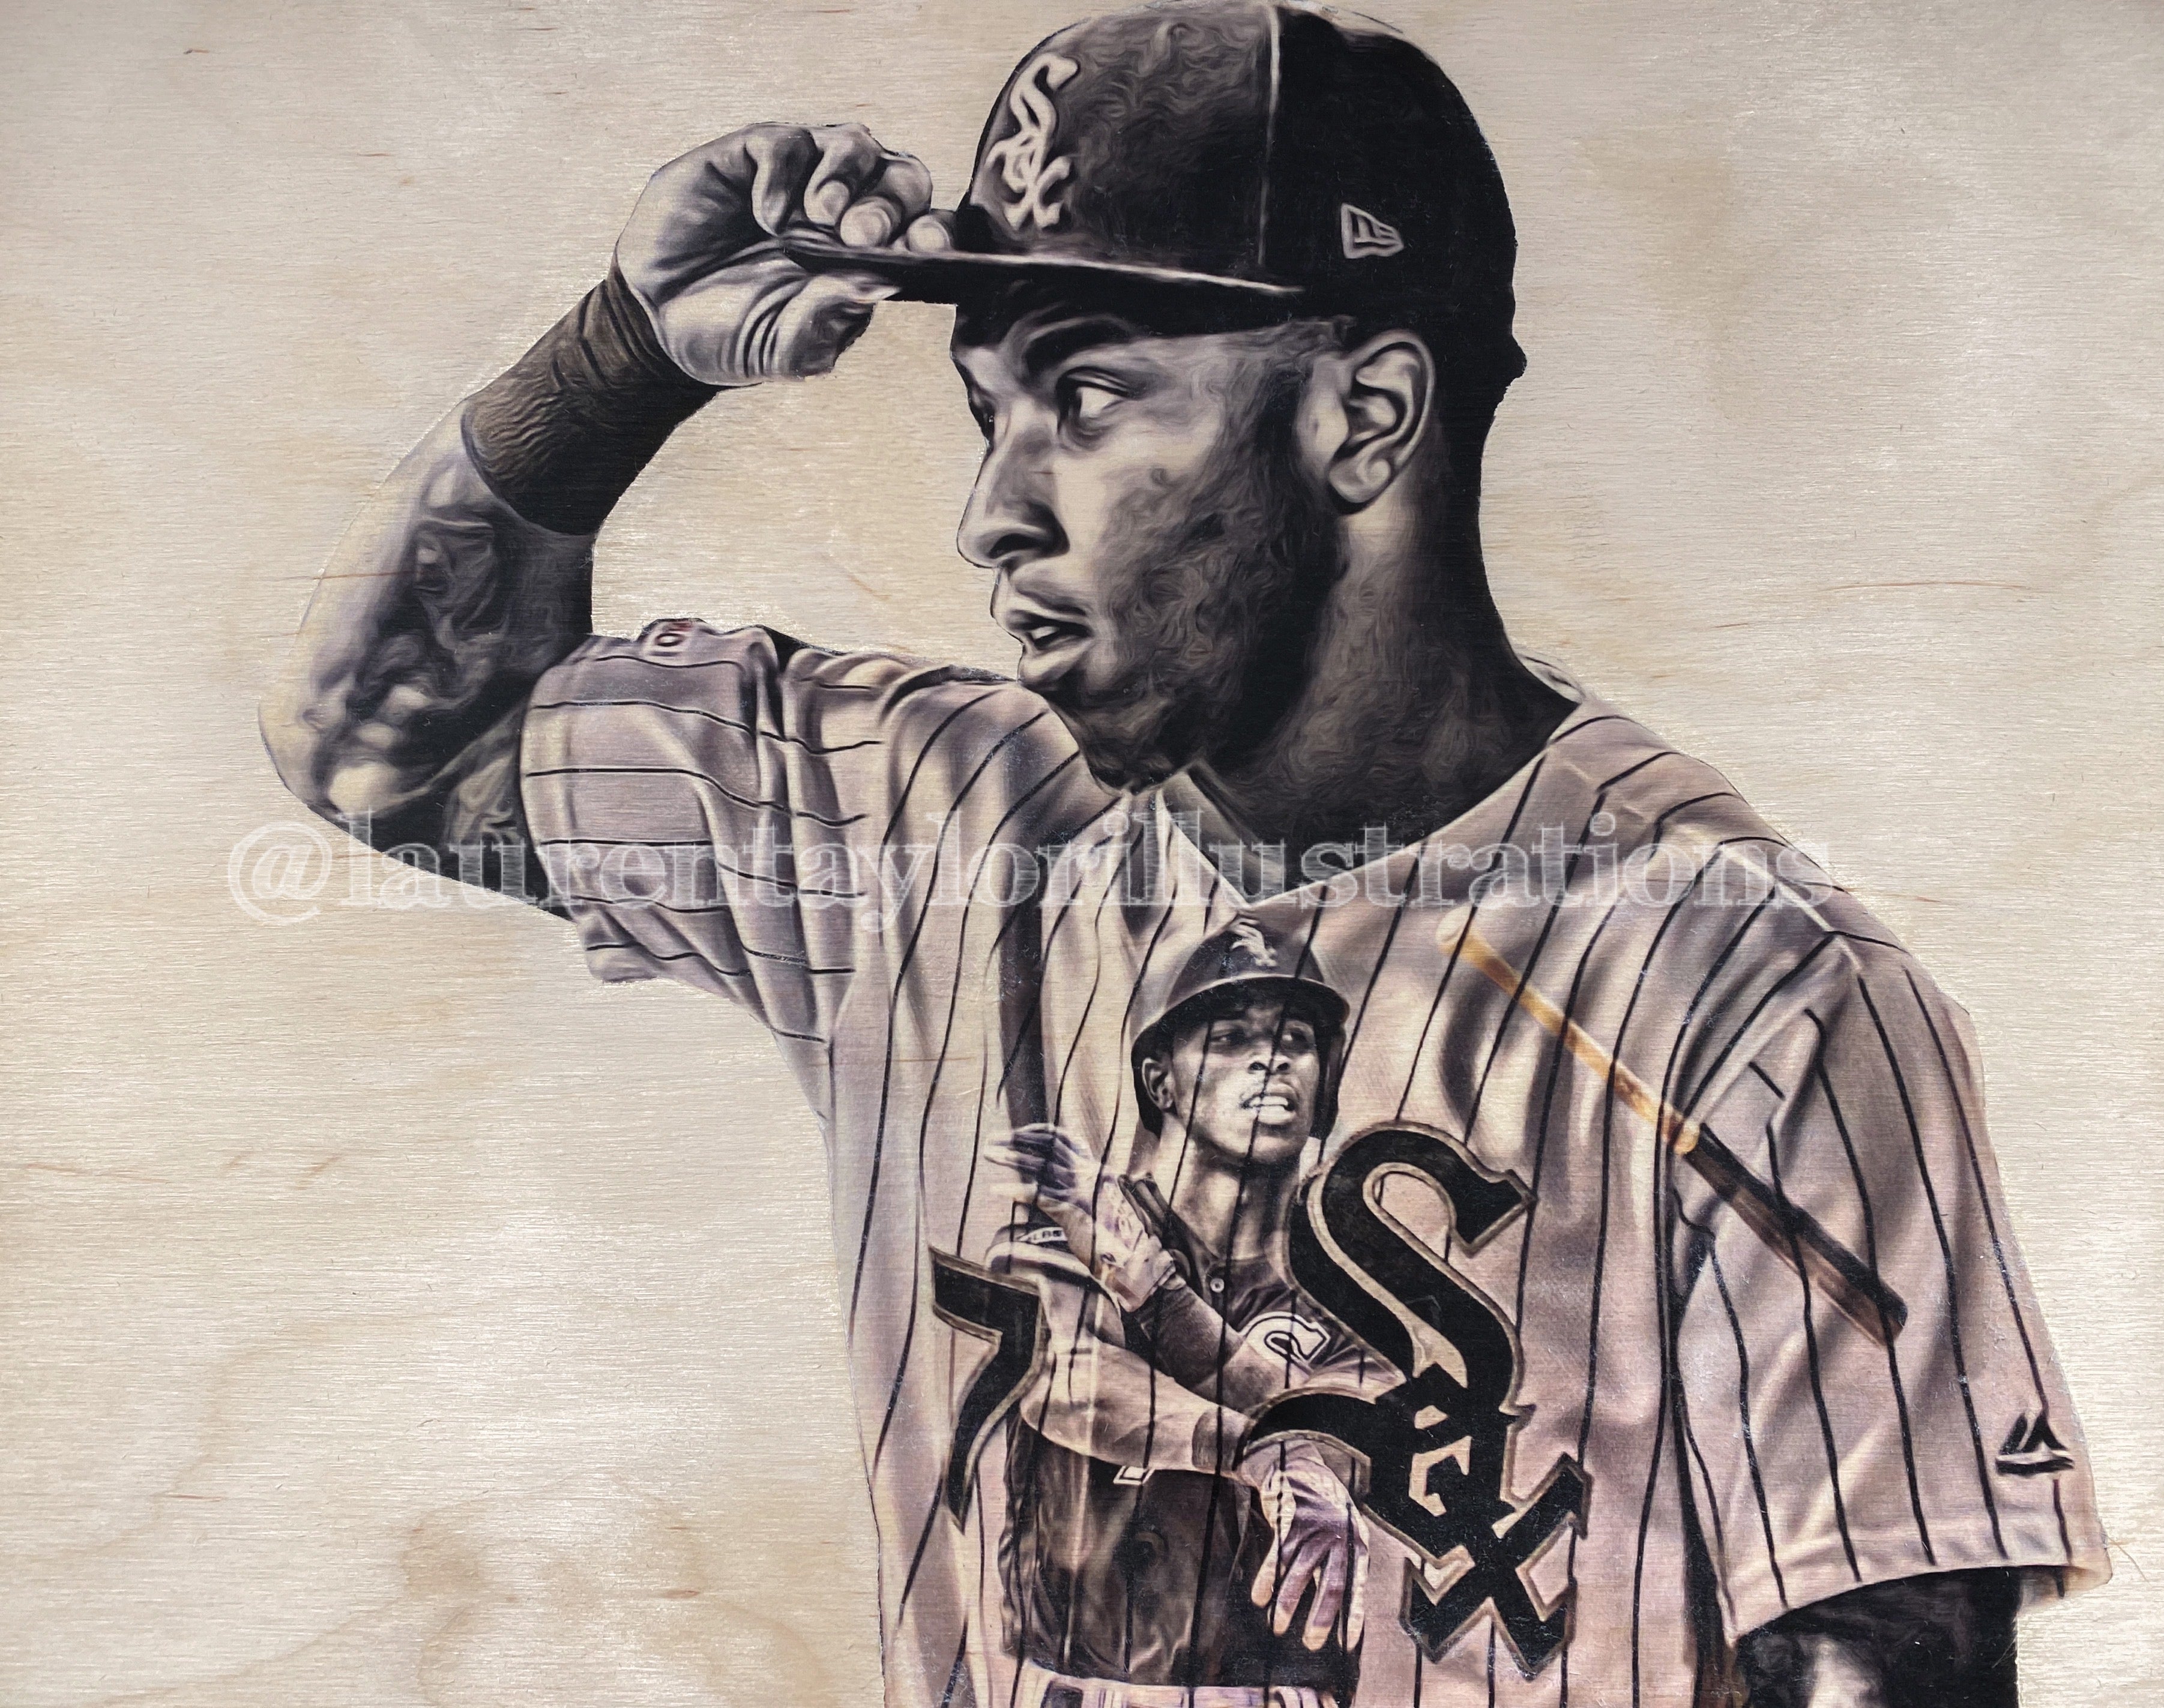 TA7 (Tim Anderson) Chicago White Sox - Officially Licensed MLB Print